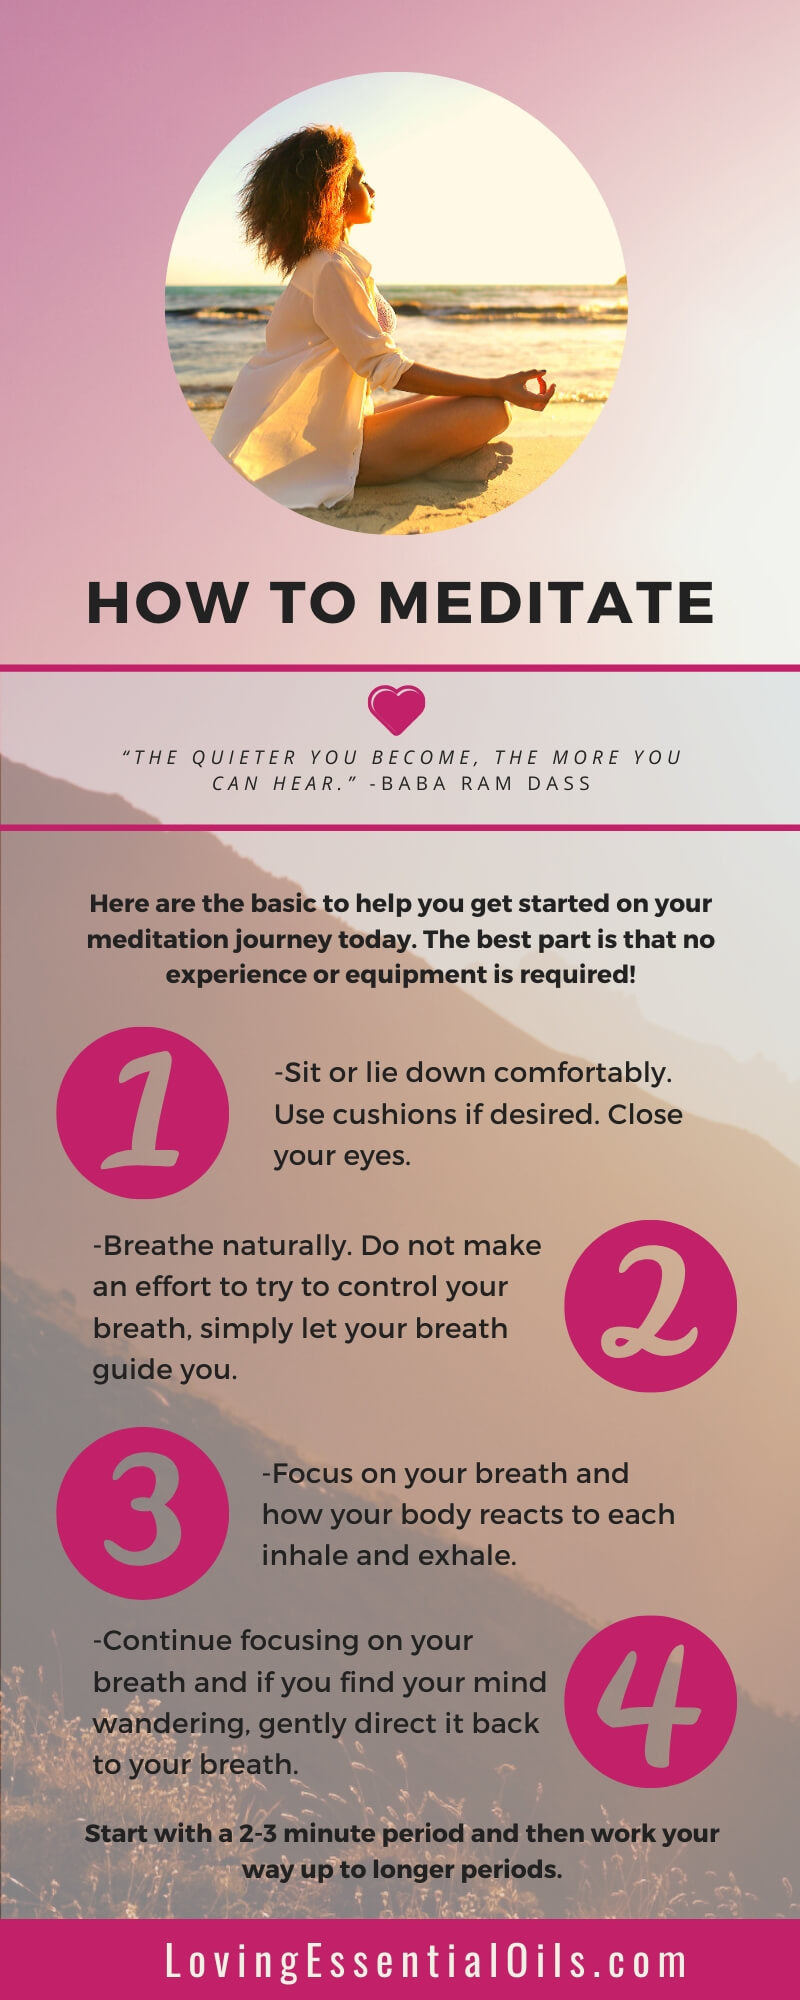 Learn How to Meditate in 4 Easy Steps with this Simple Guide